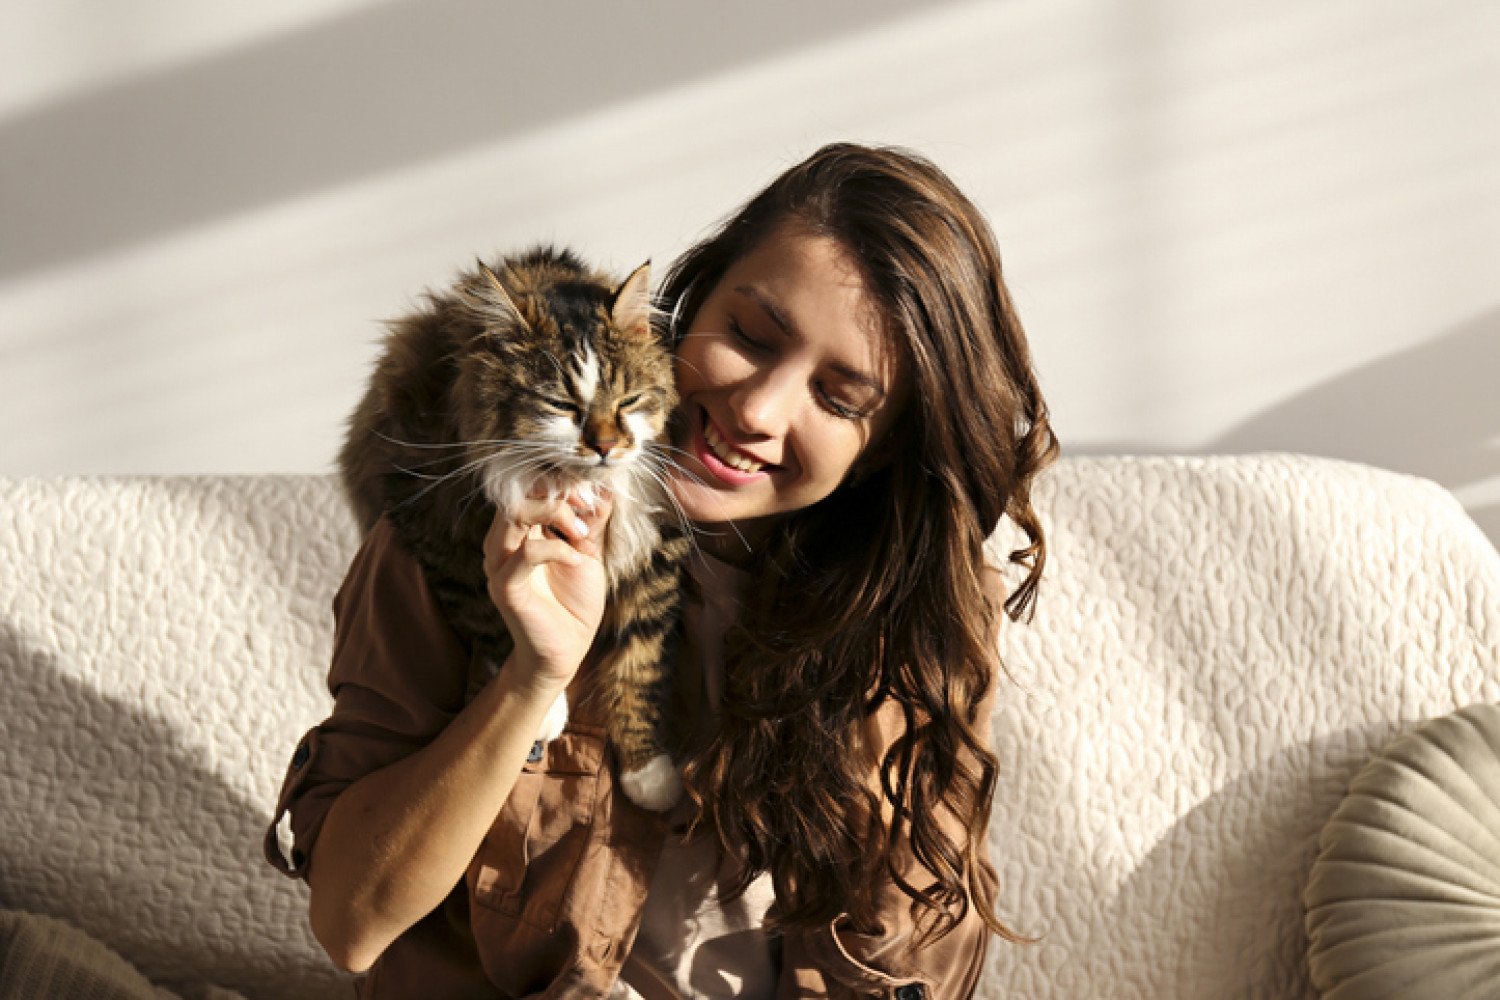 Woman sitting on a sofa petting a cat, in a brightly lit living room.